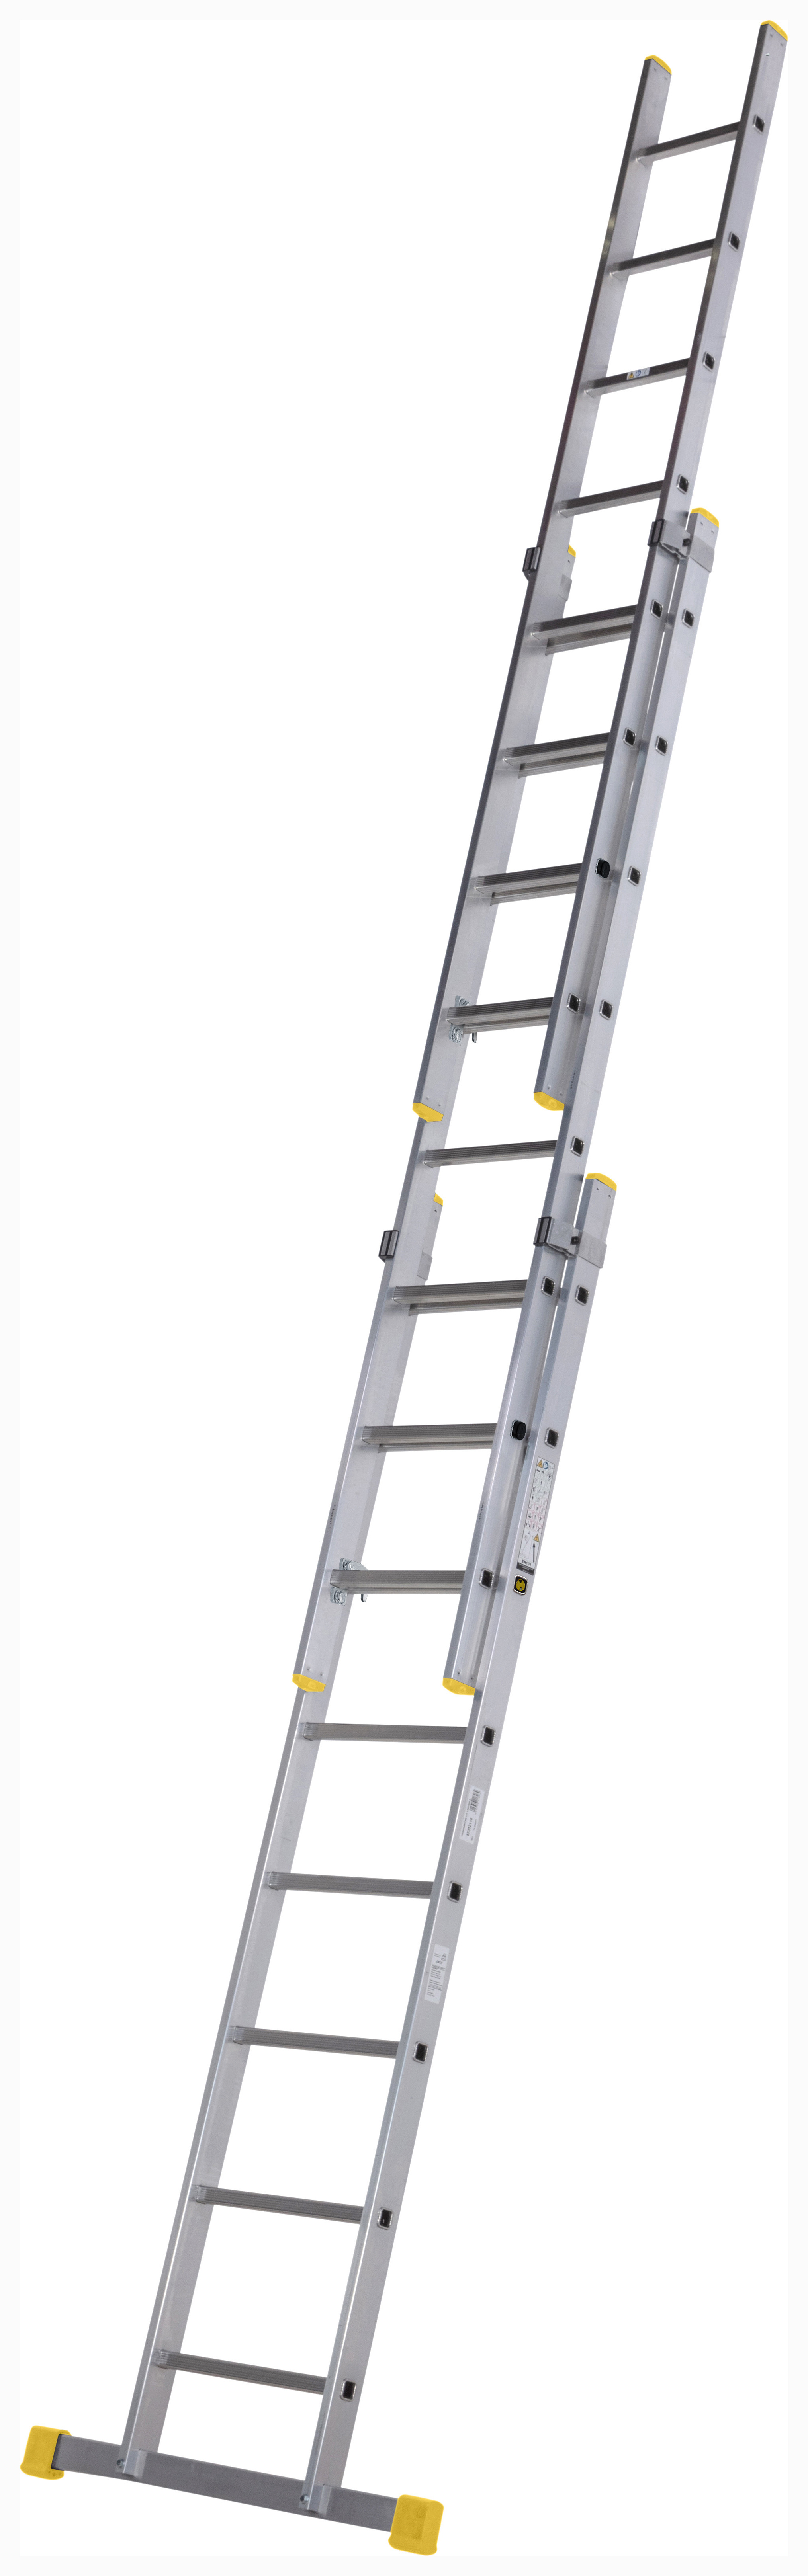 Image of Werner Professional 3 Section Aluminium Extension Ladder - 2.45m